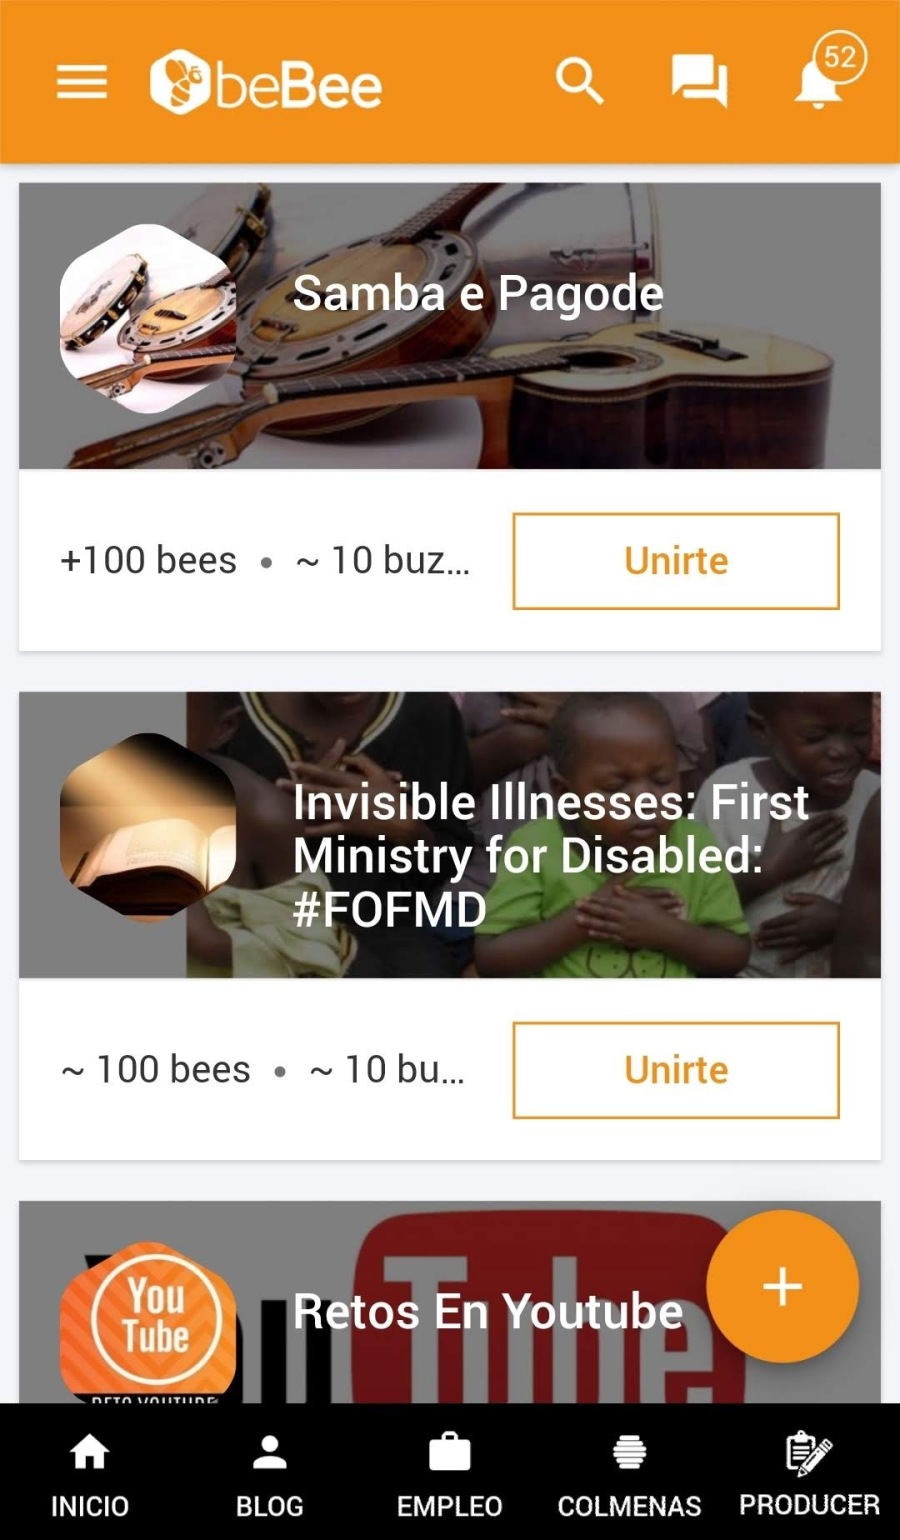 Samba e Pagode

 

+100 bees « ~ 10 buz...

Invisible Illnesses: First
Ministry for Disabled:
#FOFMD

 

~ 100 bees « ~10bu...

INICIO BLOG EMPLEO COLMENAS PRODUCER